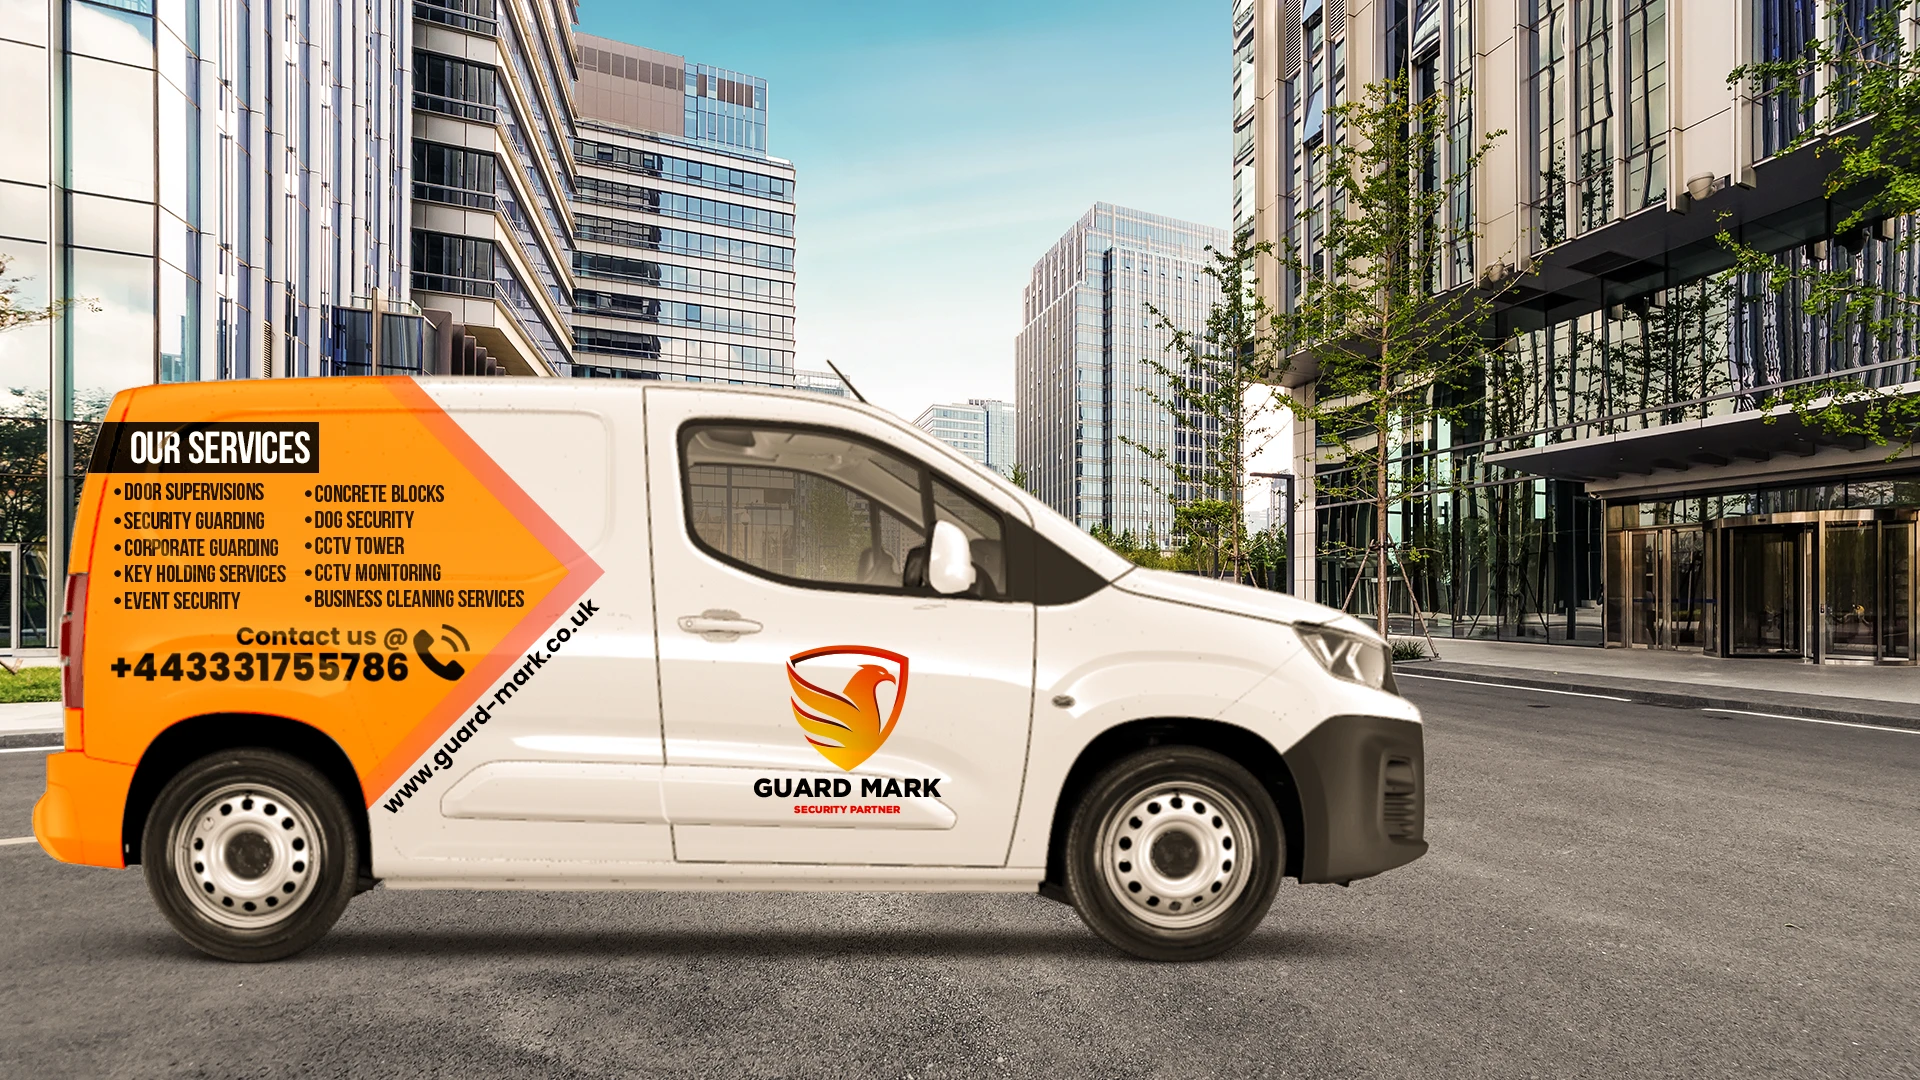 All the services offered by Guard Mark Security on their van including mobile patrol security services